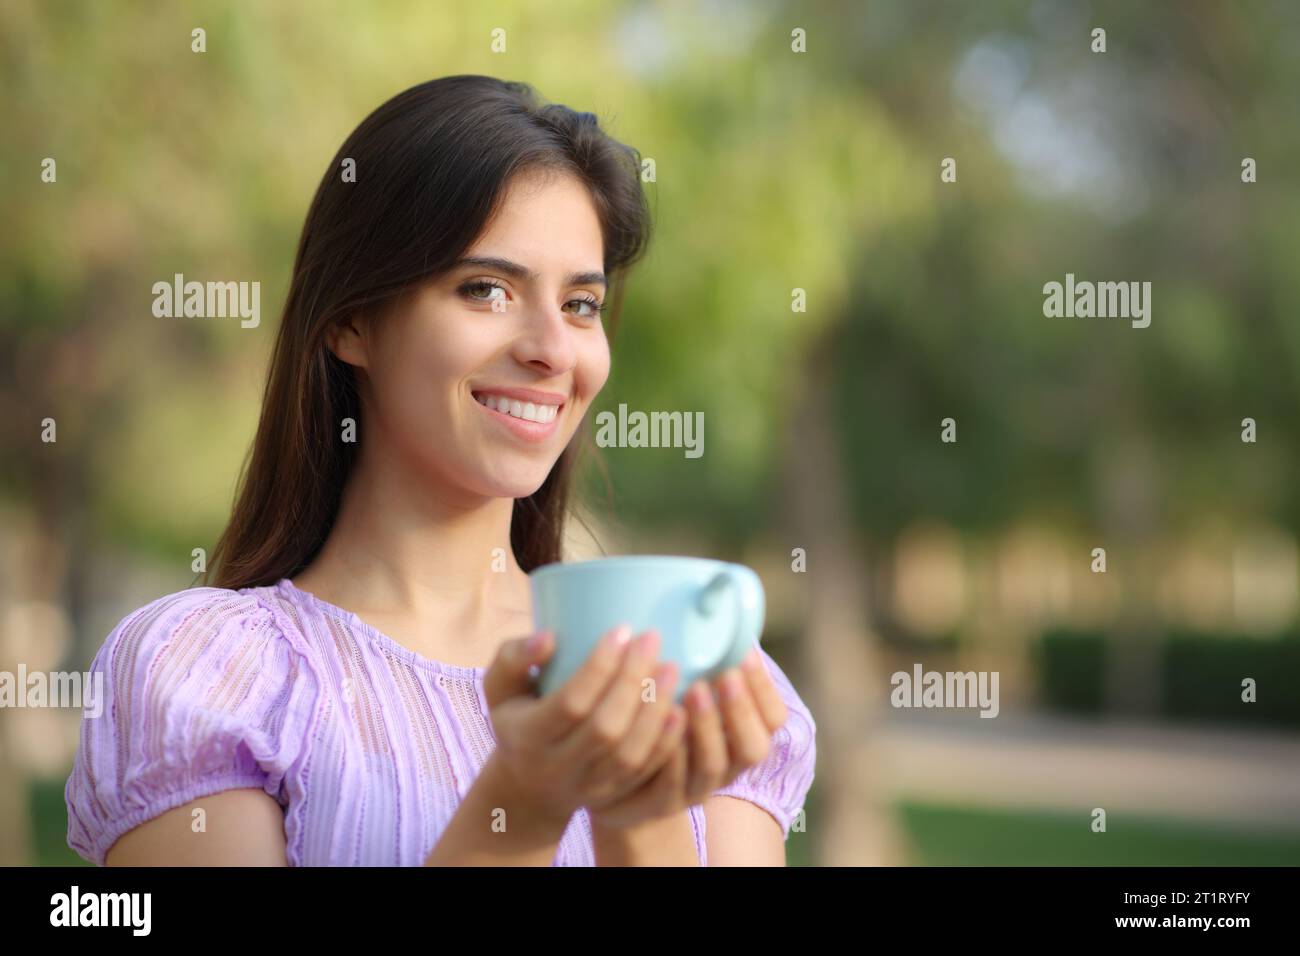 Happy woman looking at camera holding coffee cup in a park Stock Photo